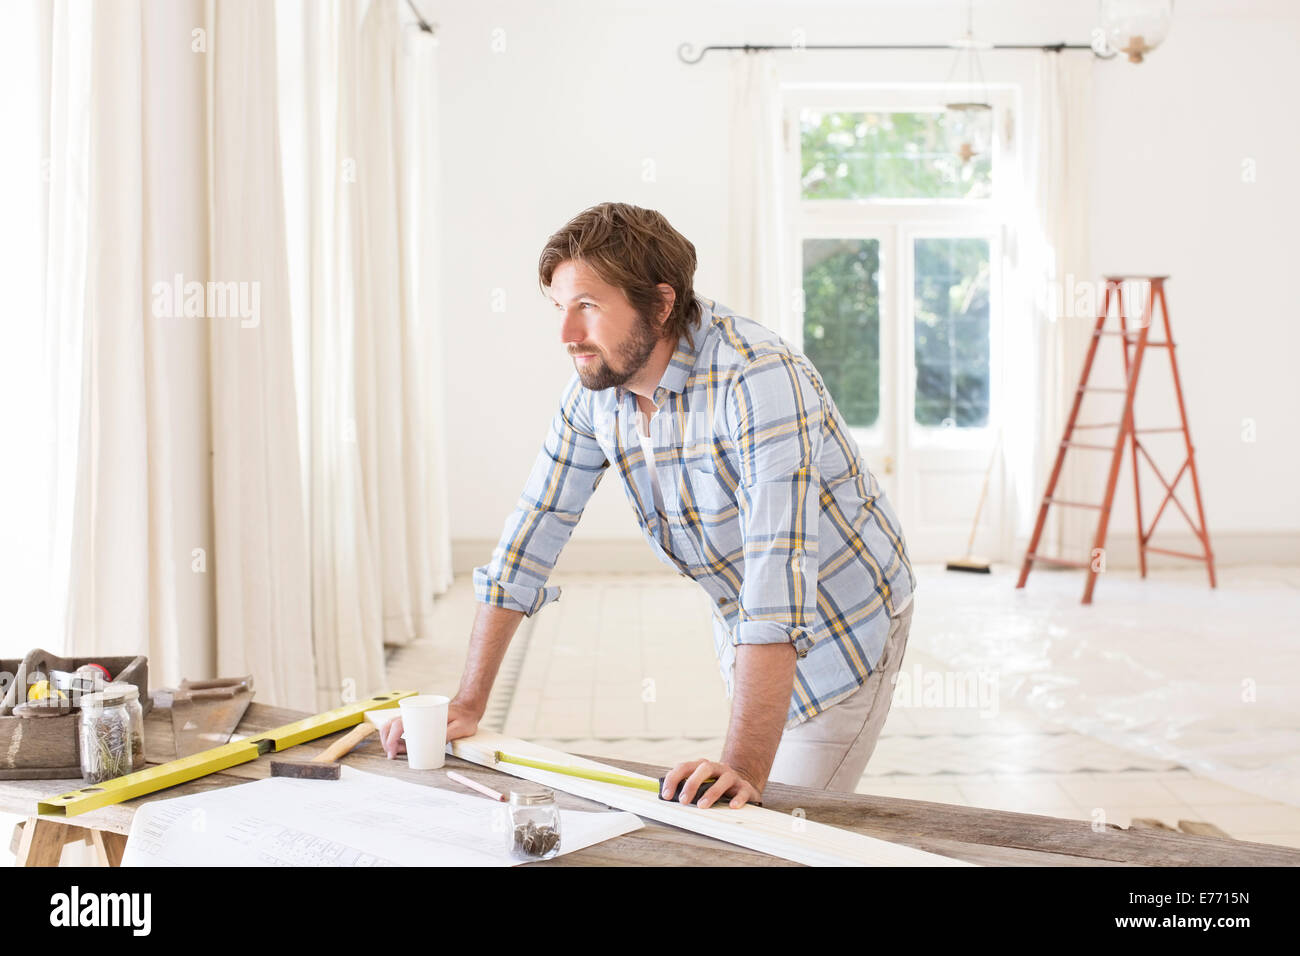 Man overlooking construction table in living space Stock Photo